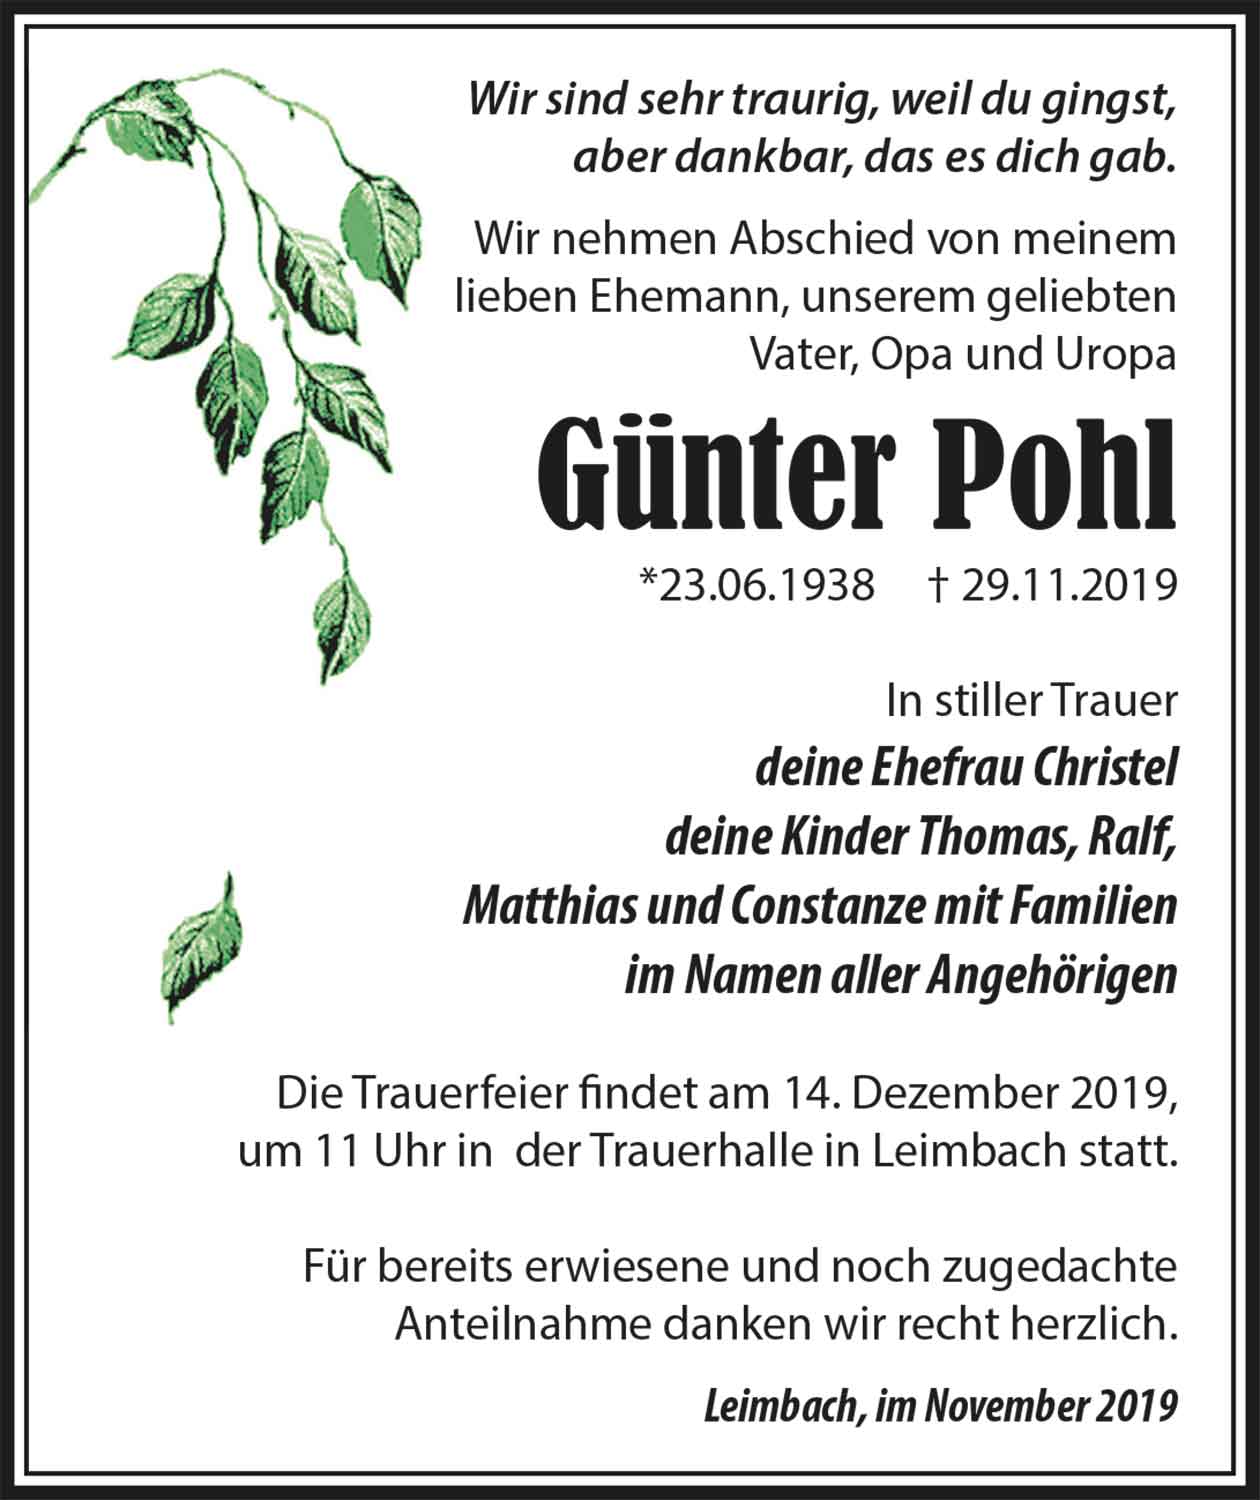 Trauer_Pohl_Guenter